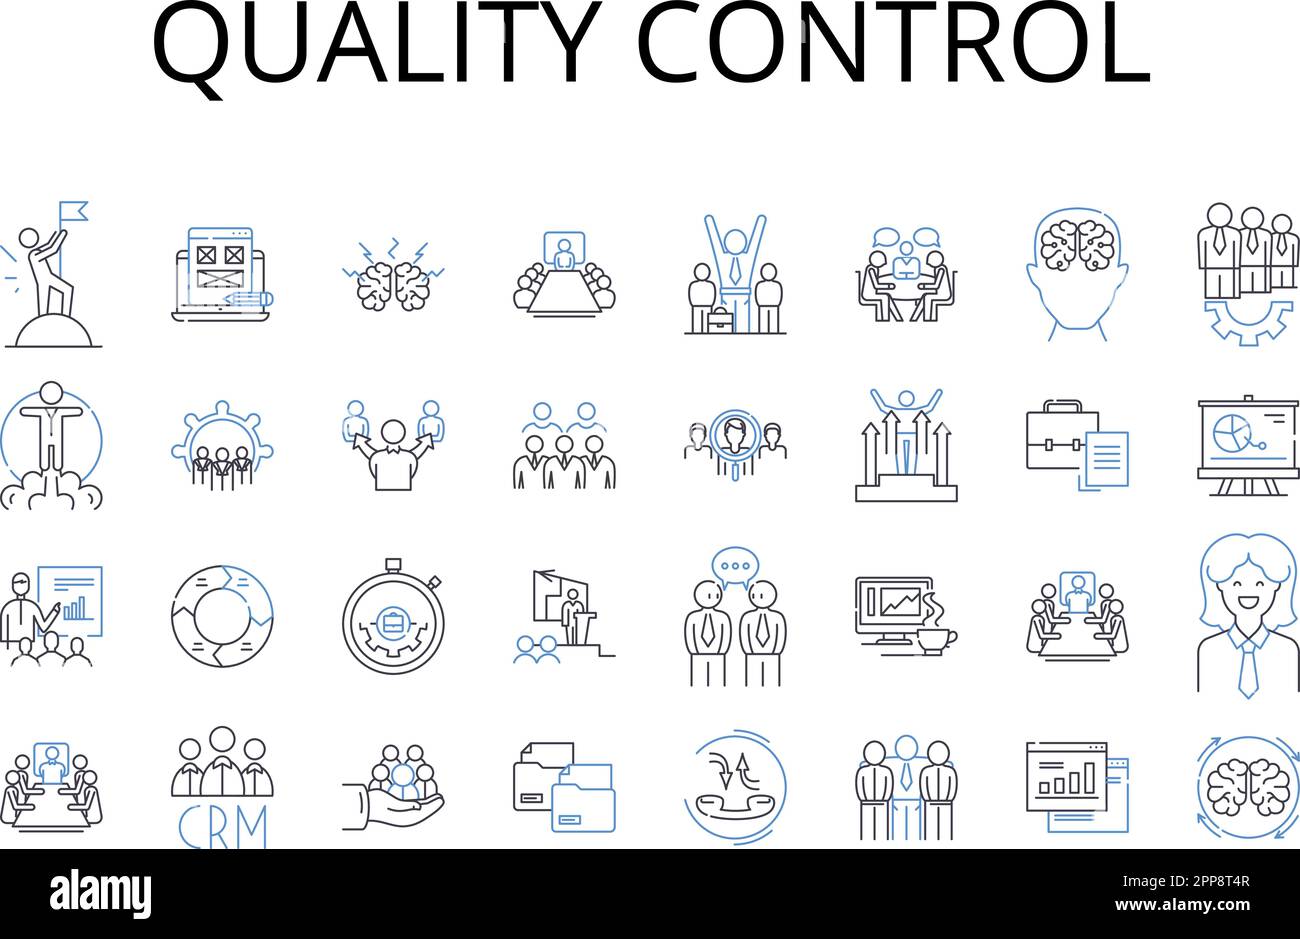 Quality control line icons collection. Risk management, Project planning, Employee training, Sales strategy, Product design, Customer satisfaction Stock Vector